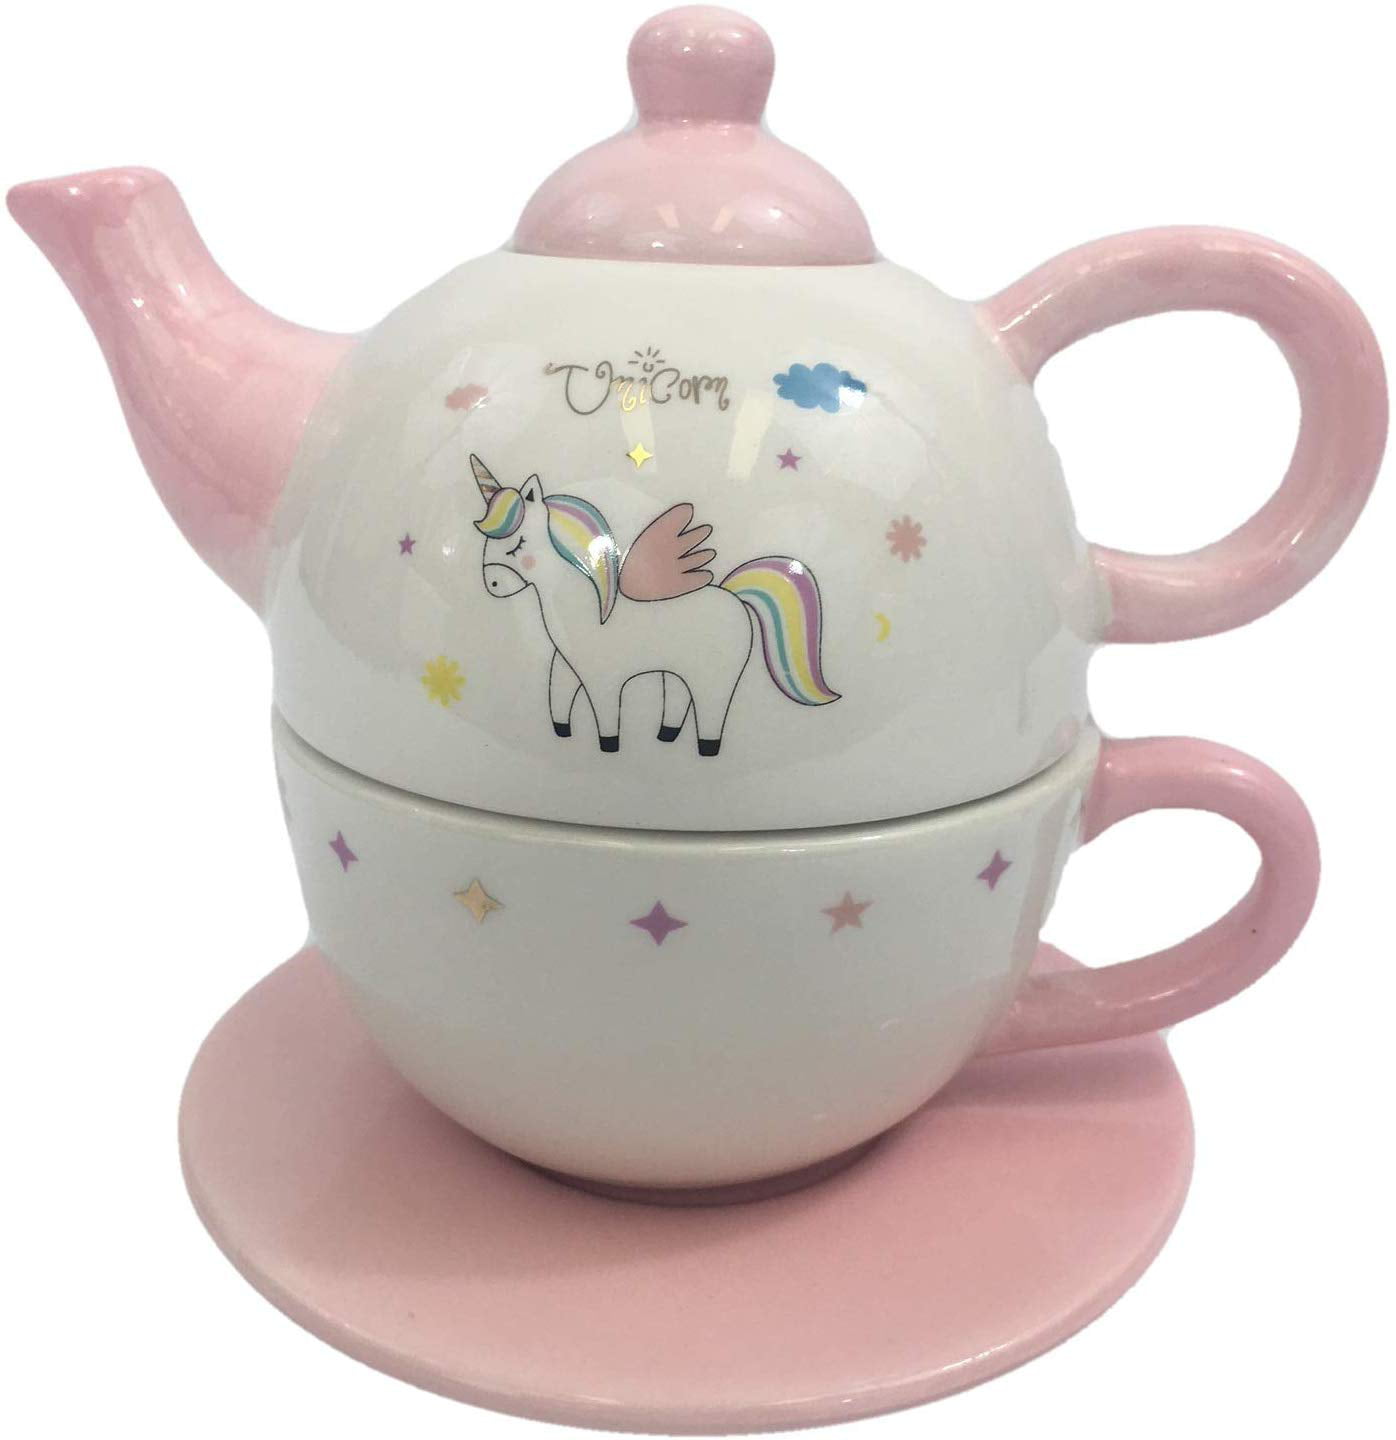 Teapot with Cup Tea for One 4-Piece Unicorn Tea Set Made of Porcelain 